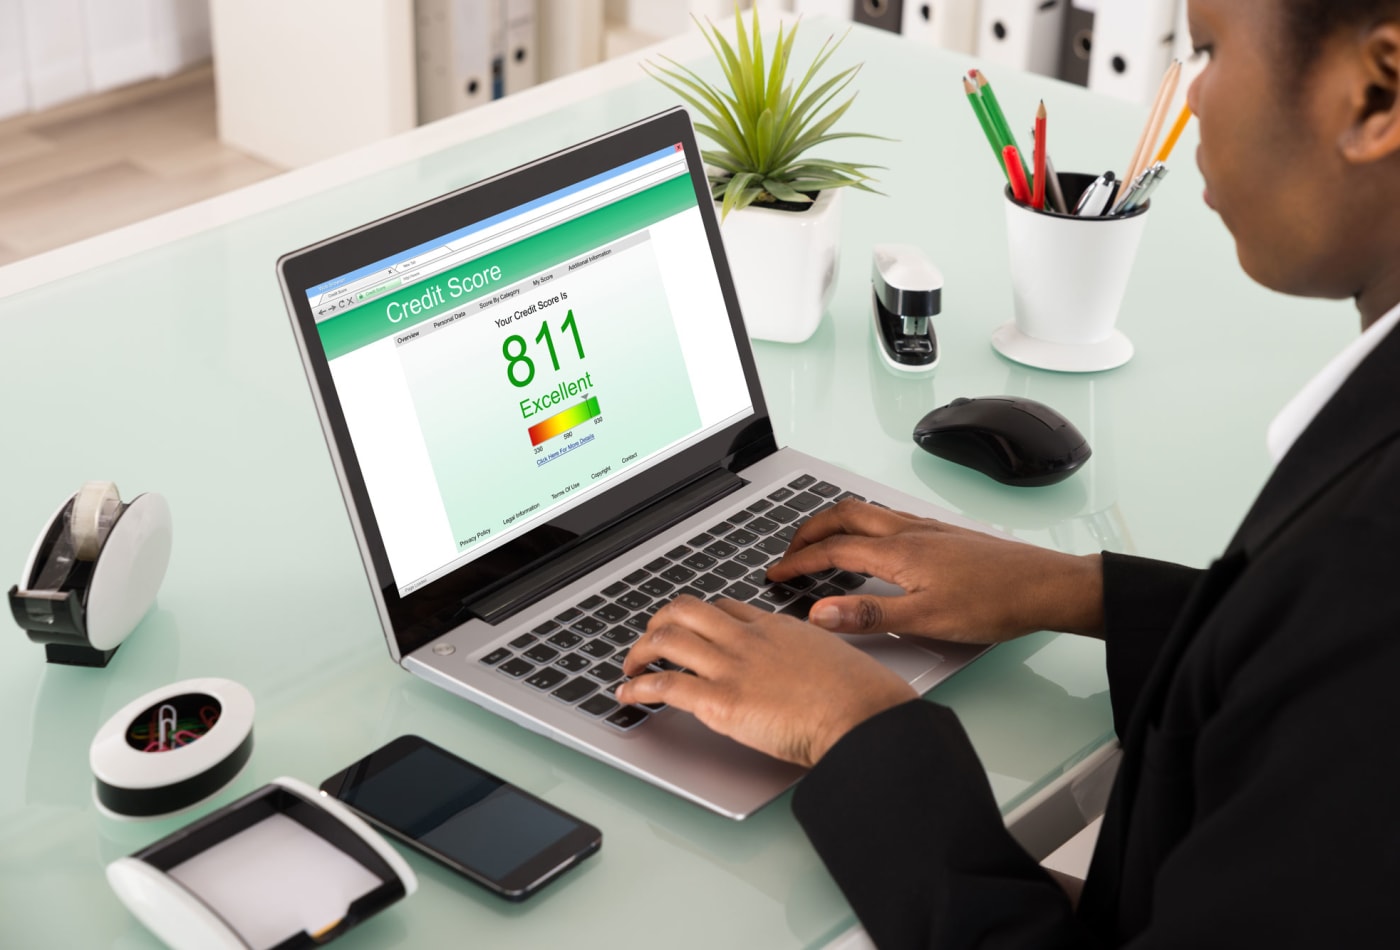 Best Way to Check Credit Score